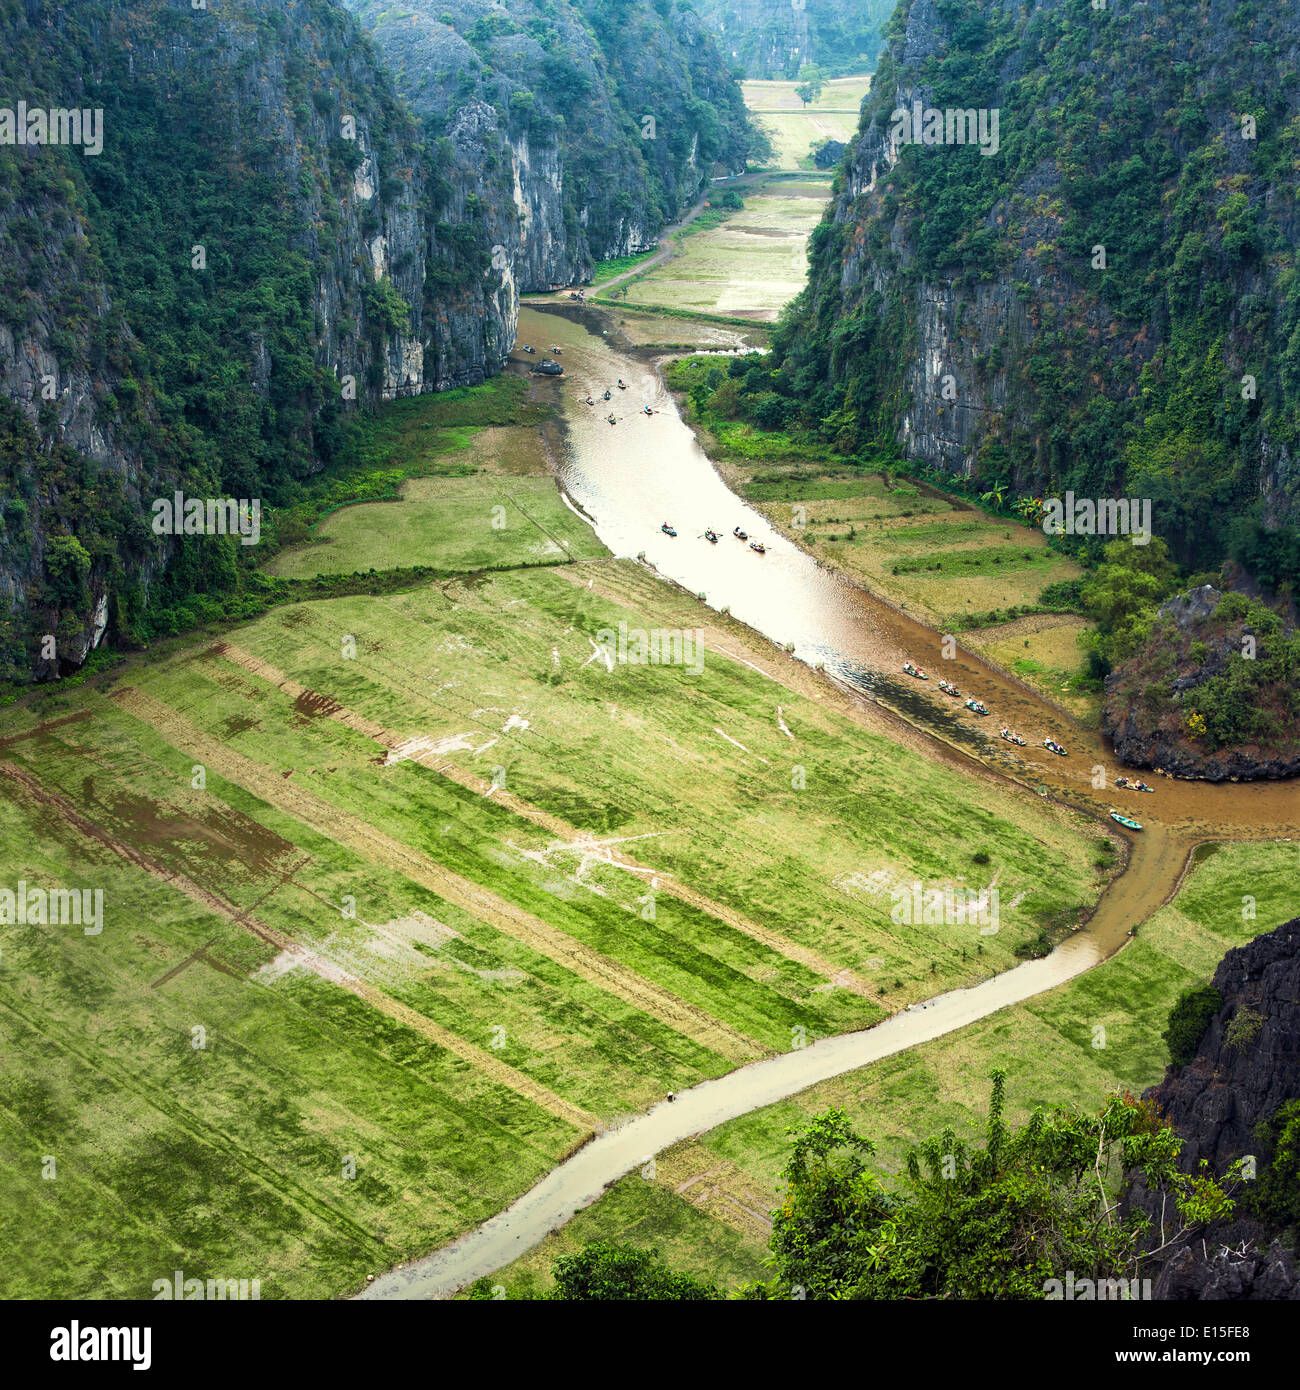 Tam Coc - Bich Dong Rice field and river, NinhBinh, vietnam landscapes Stock Photo